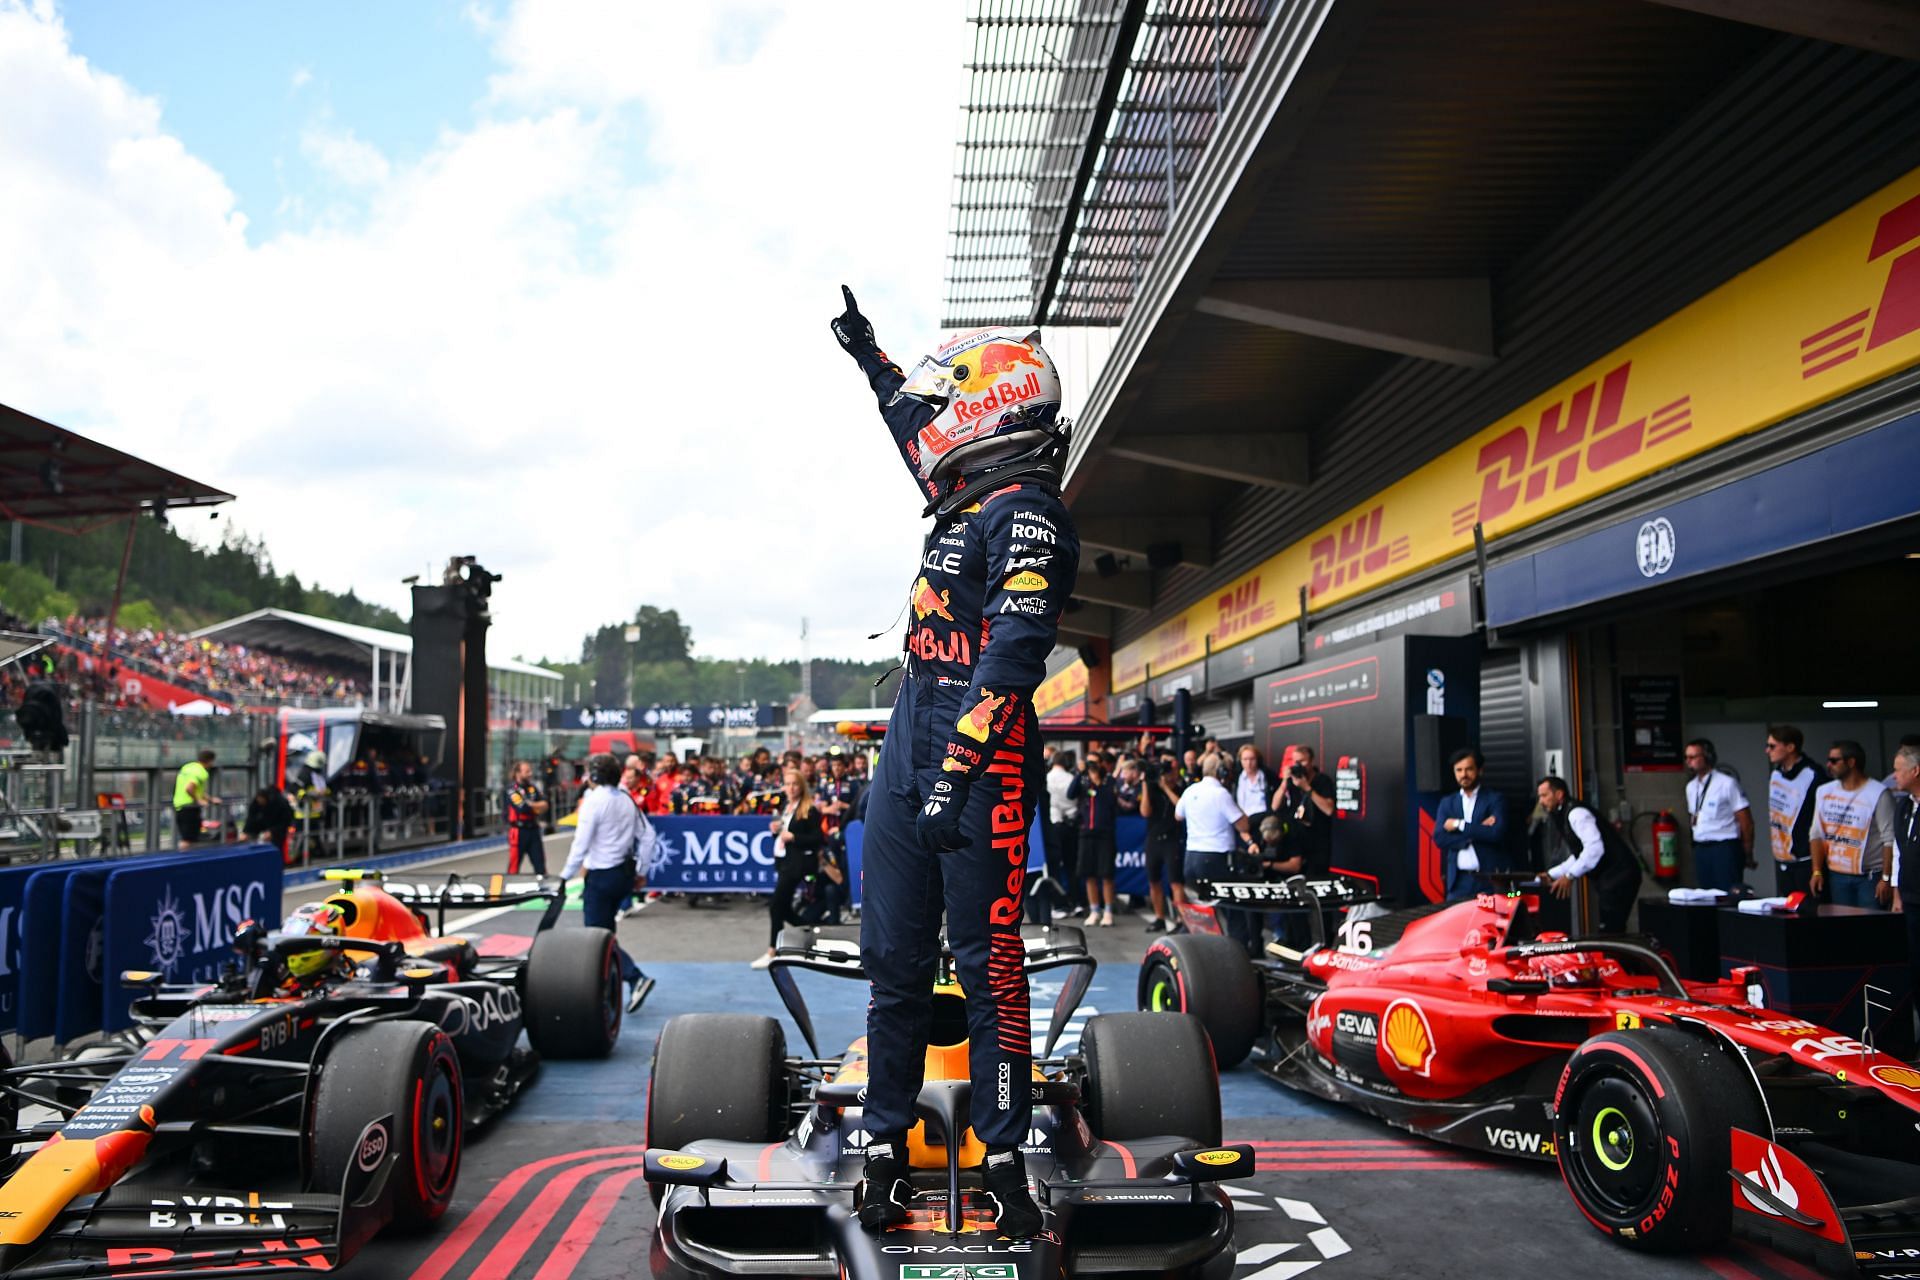 2023 Belgium F1 GP Final results of the race as Max Verstappen wins again at Spa